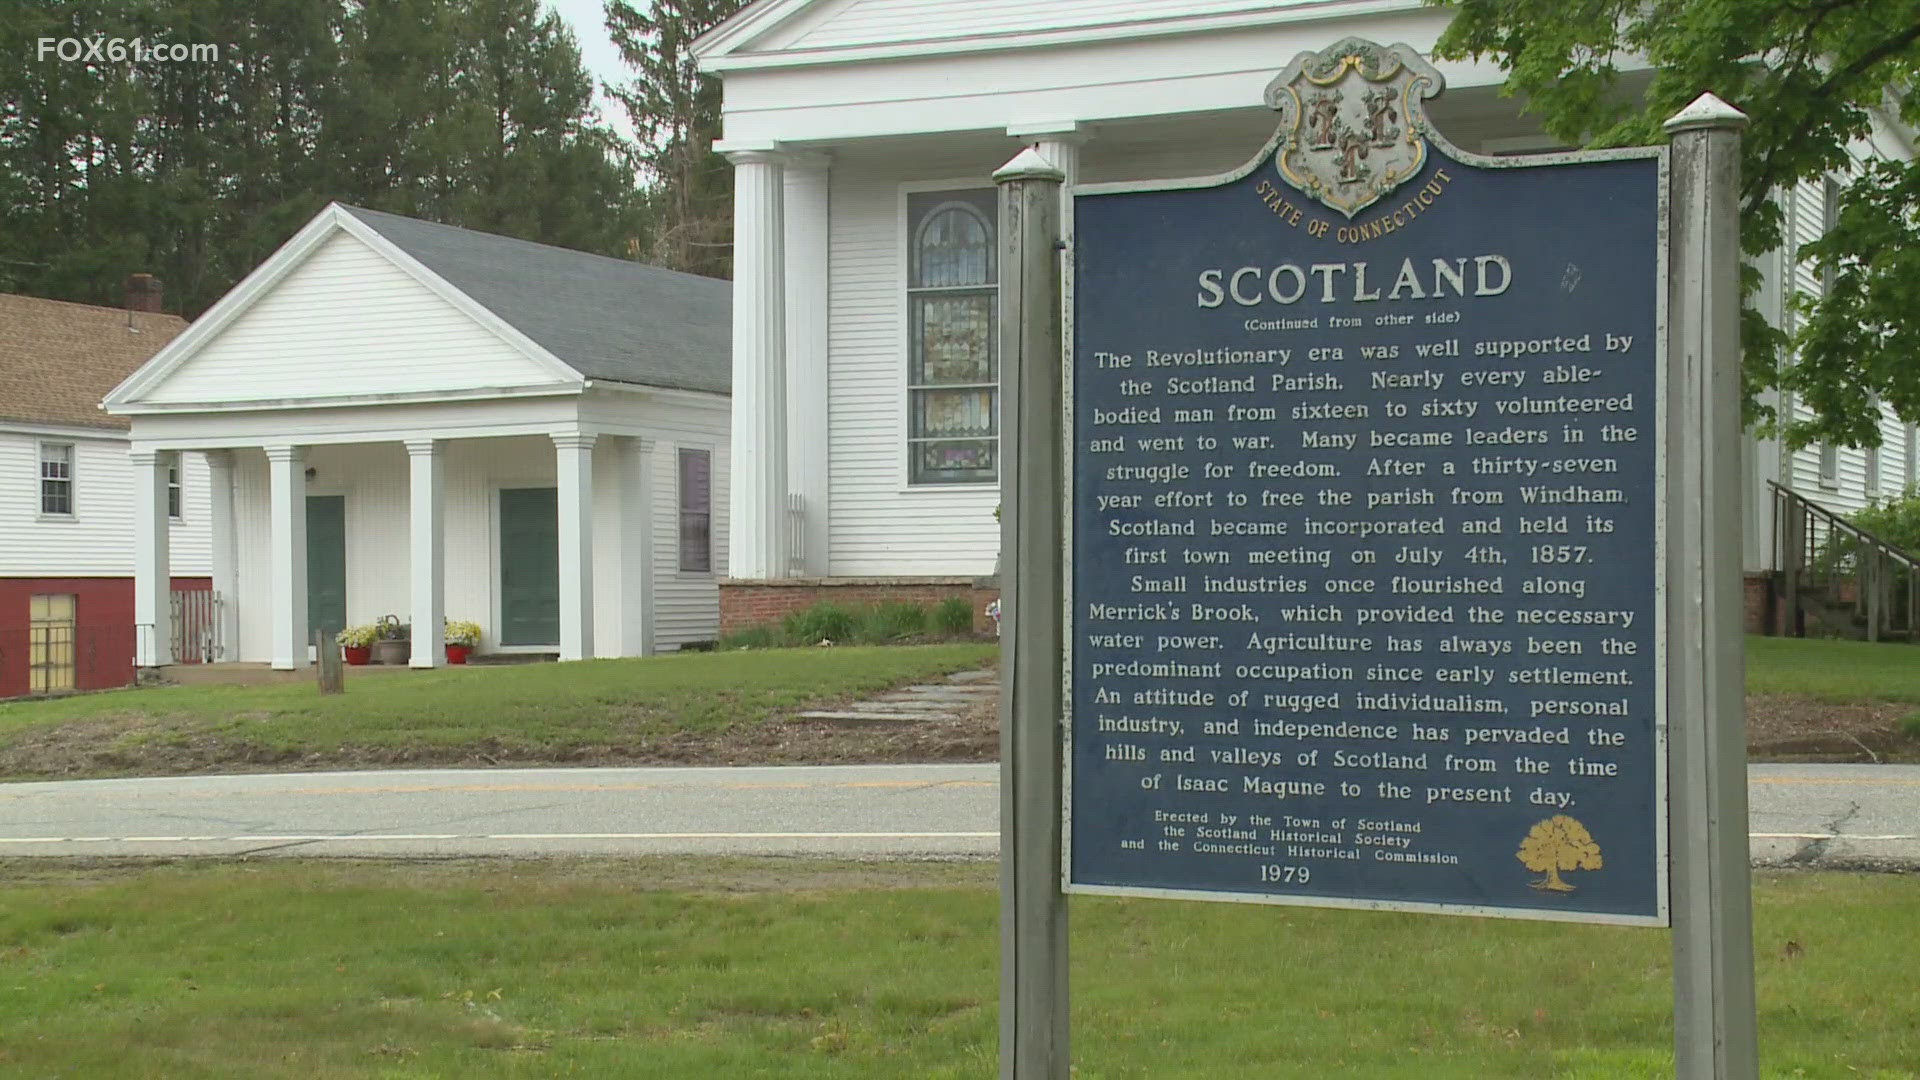 The town of Scotland has about 1,600 residents and six different zip codes. The town has been unsuccessful working with the postal service to change that.